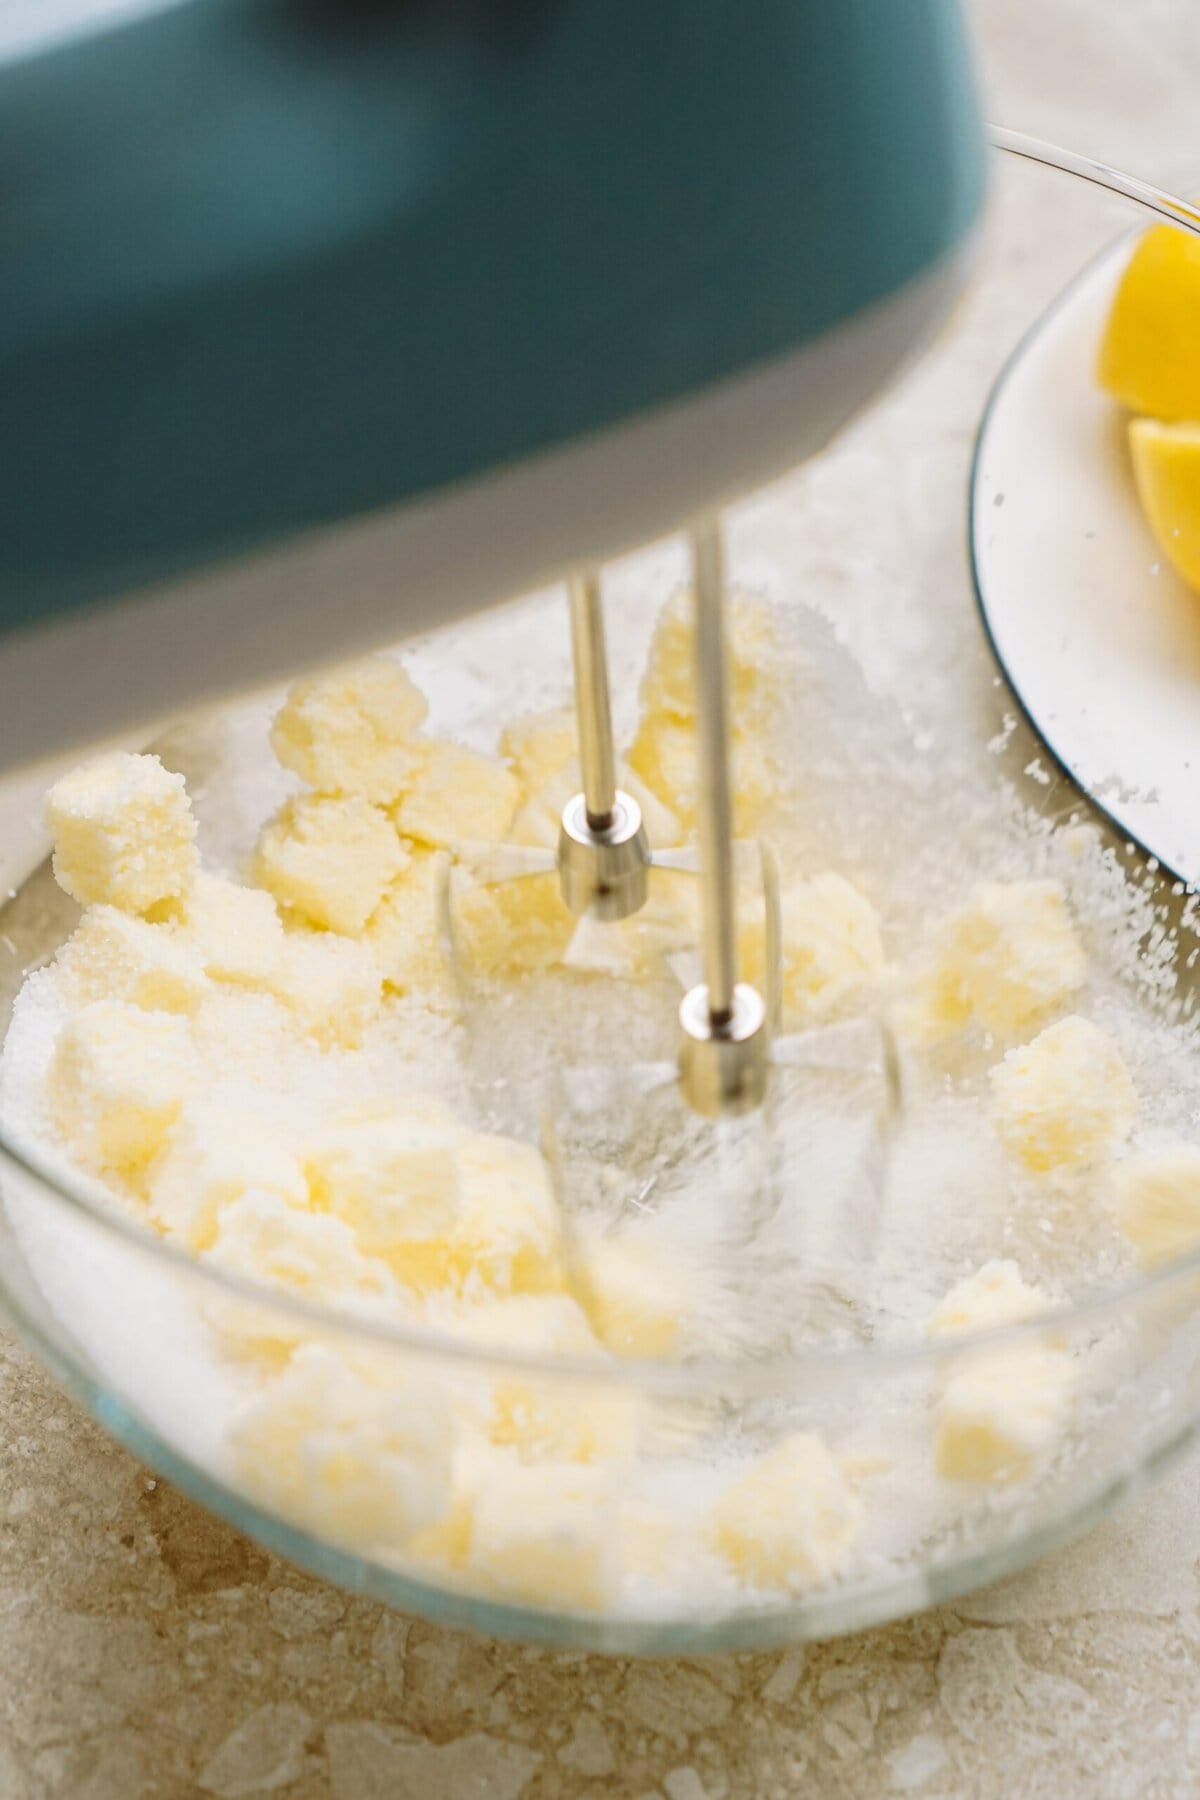 An electric mixer beating butter and sugar in a glass bowl, with lemon wedges in the background.